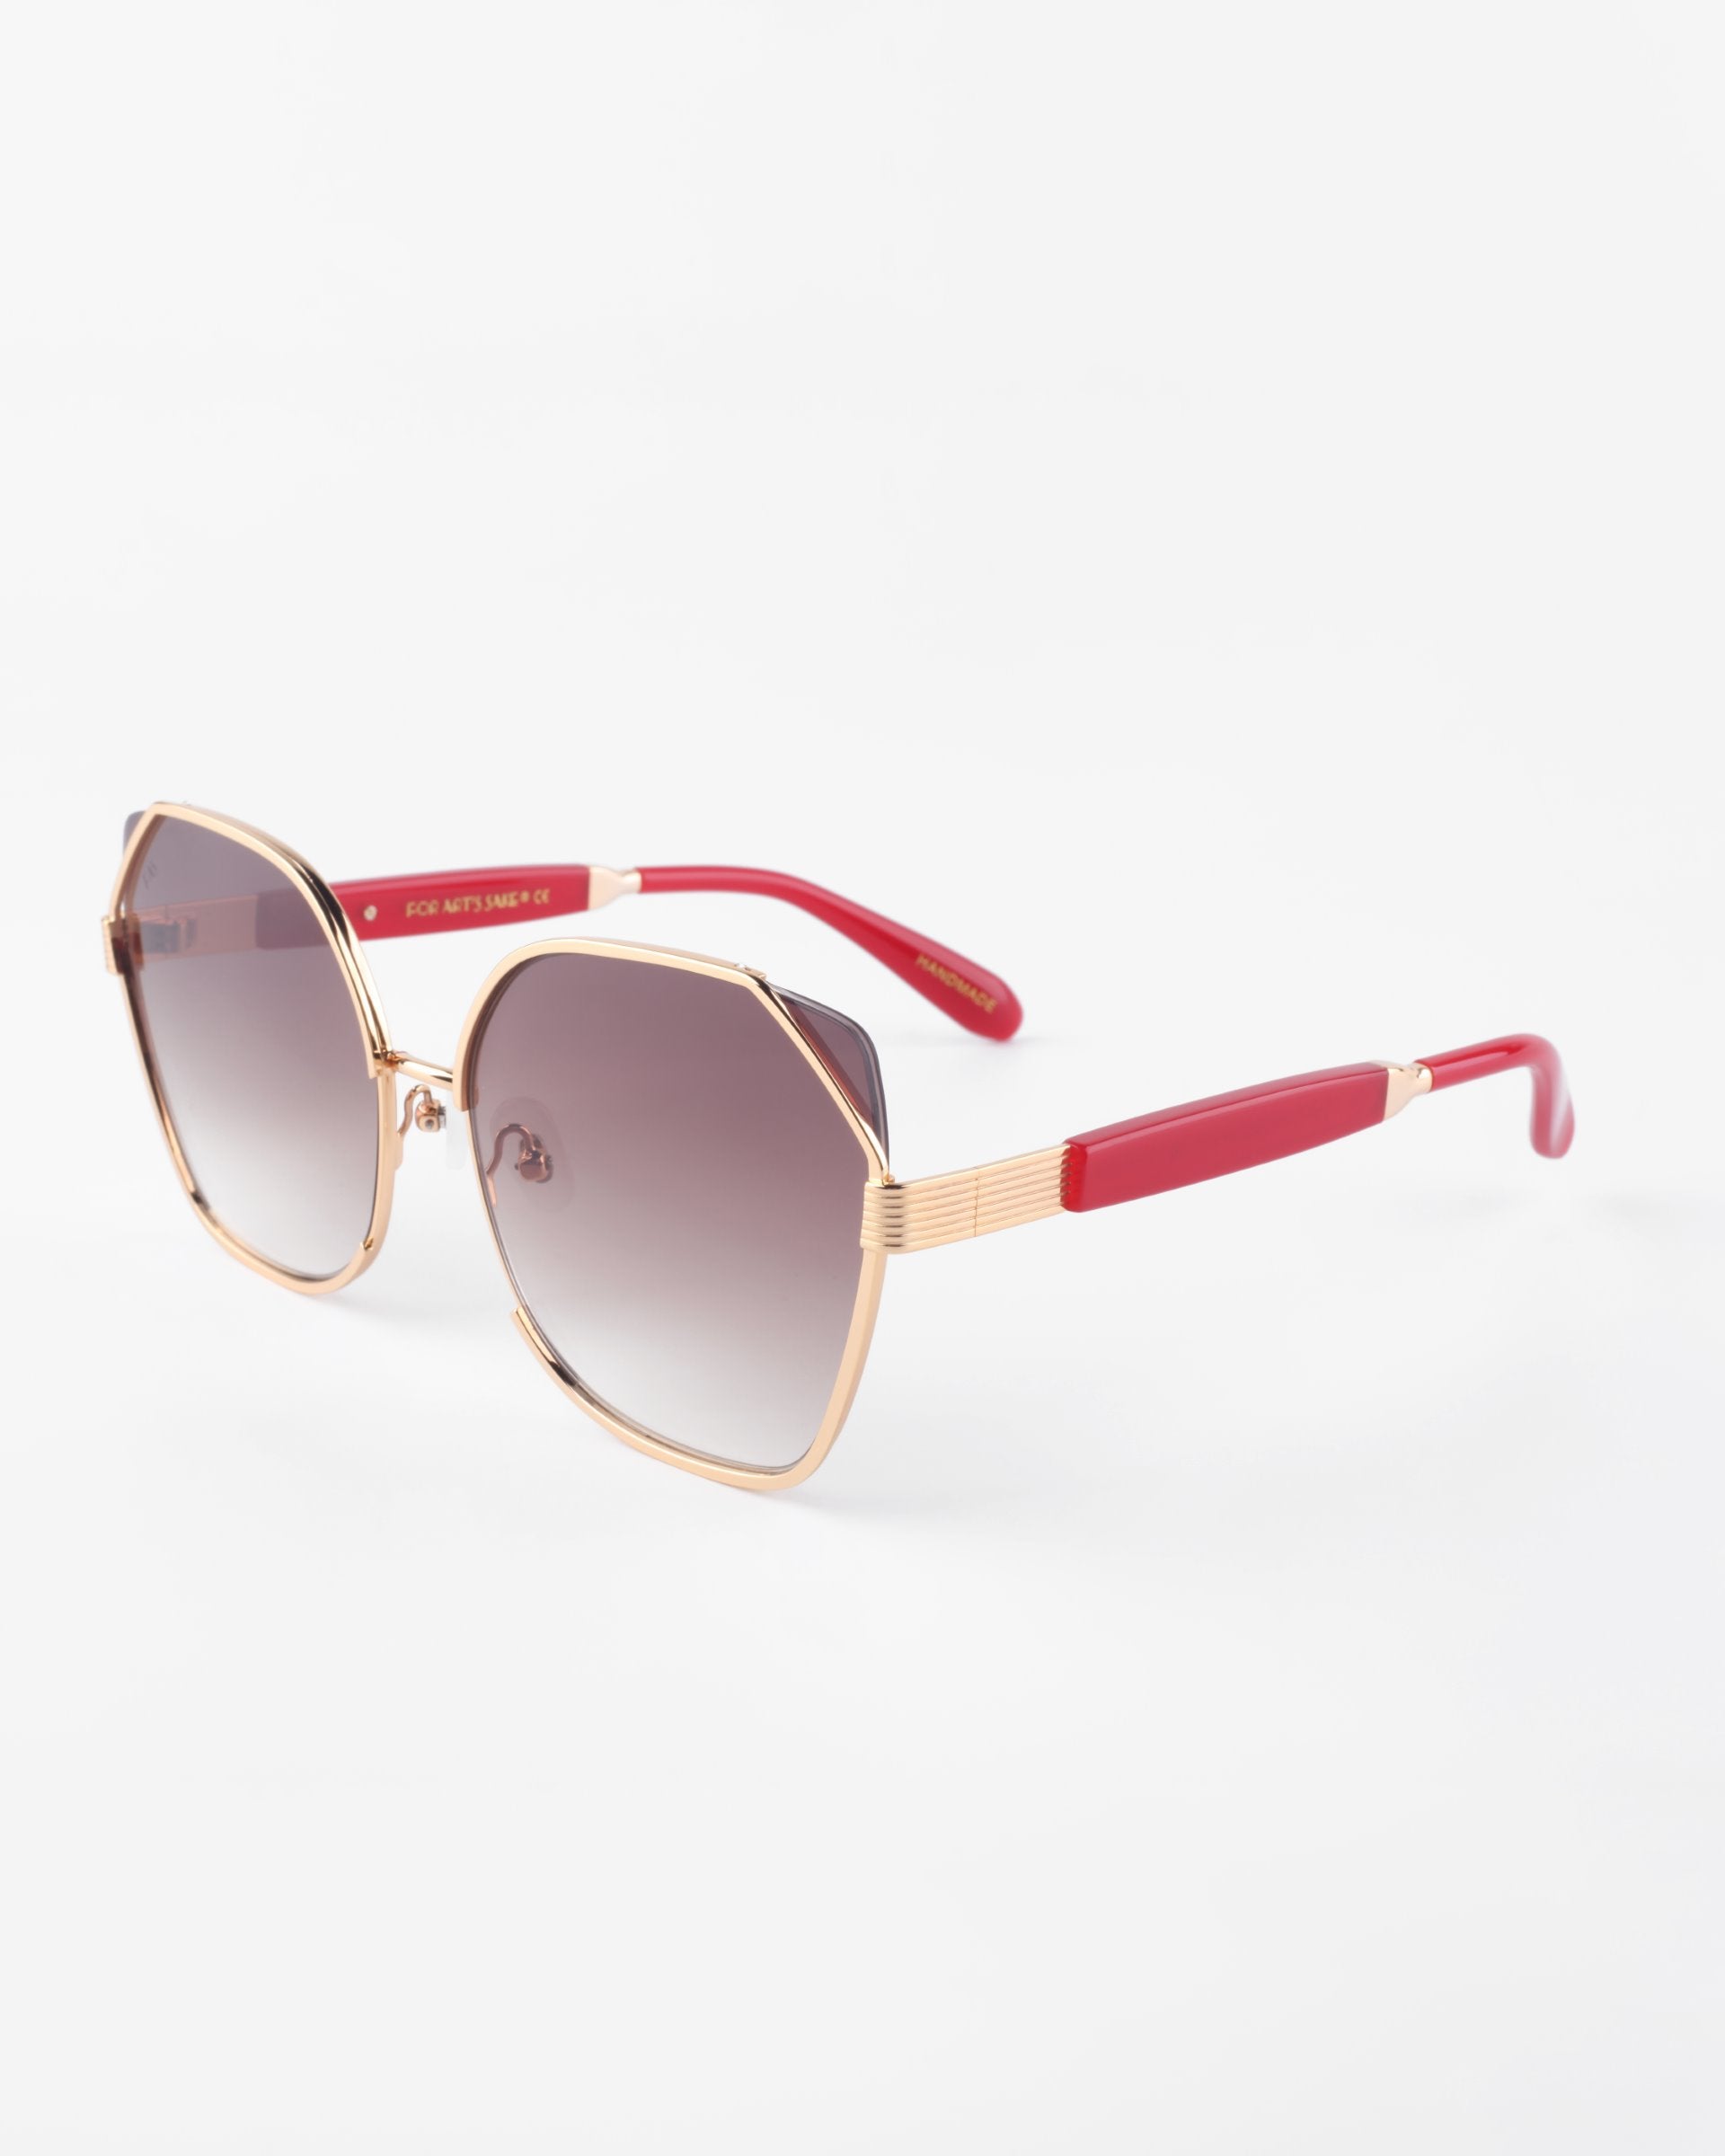 A pair of stylish Montage sunglasses by For Art&#39;s Sake® with a gold-plated stainless steel frame and hexagonal lenses, featuring red arms with gold accents. The ultra-lightweight nylon lenses are tinted in a gradient from dark to light, providing a sleek and modern look while offering 100% UVA &amp; UVB protection. The background is plain white.